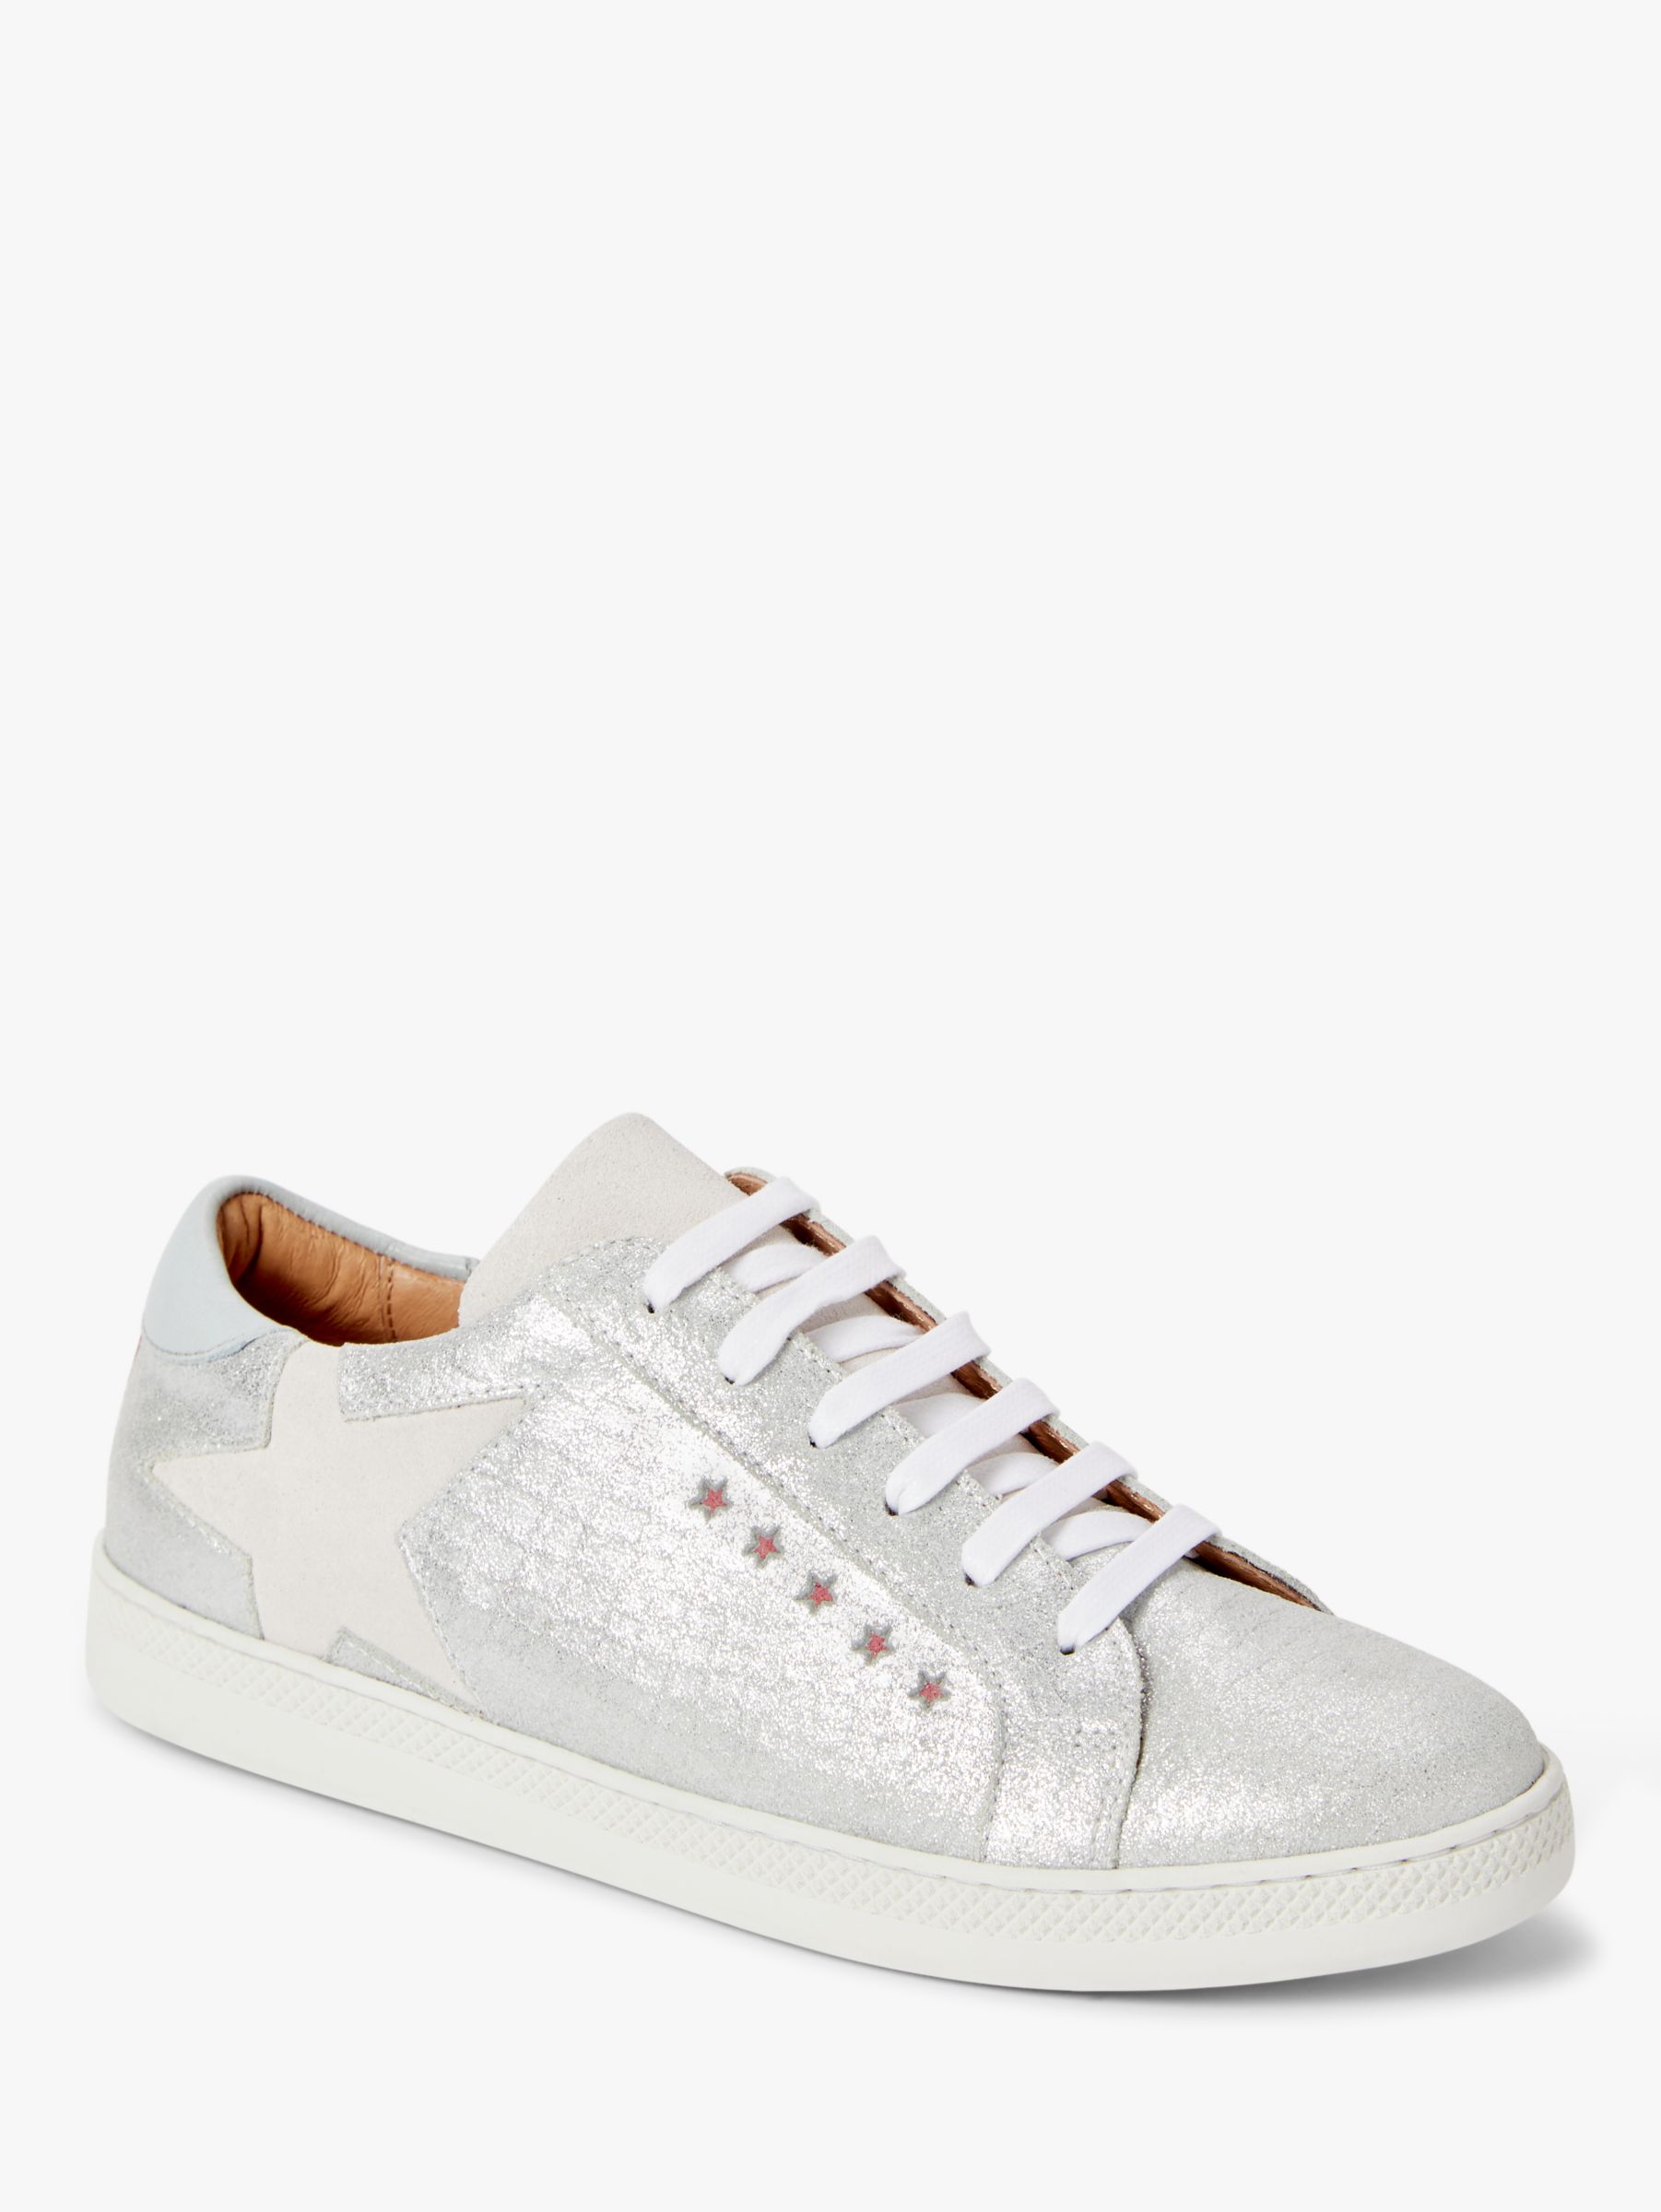 AND/OR Elana Leather Star Trainers, Silver at John Lewis & Partners